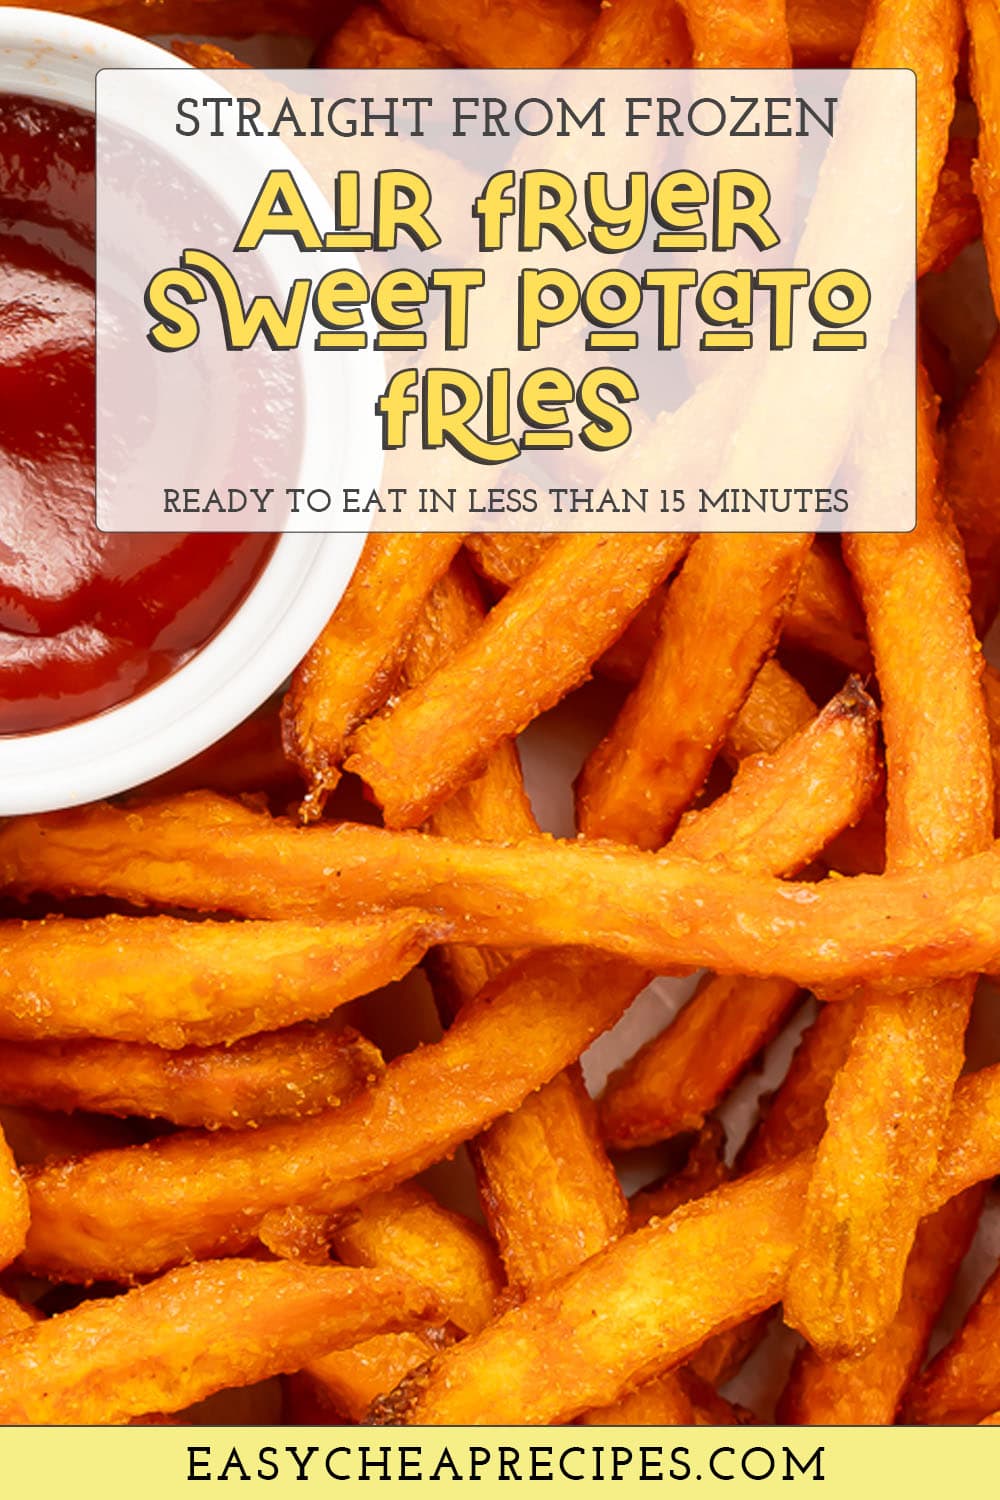 Pin graphic for air fryer frozen sweet potato fries.